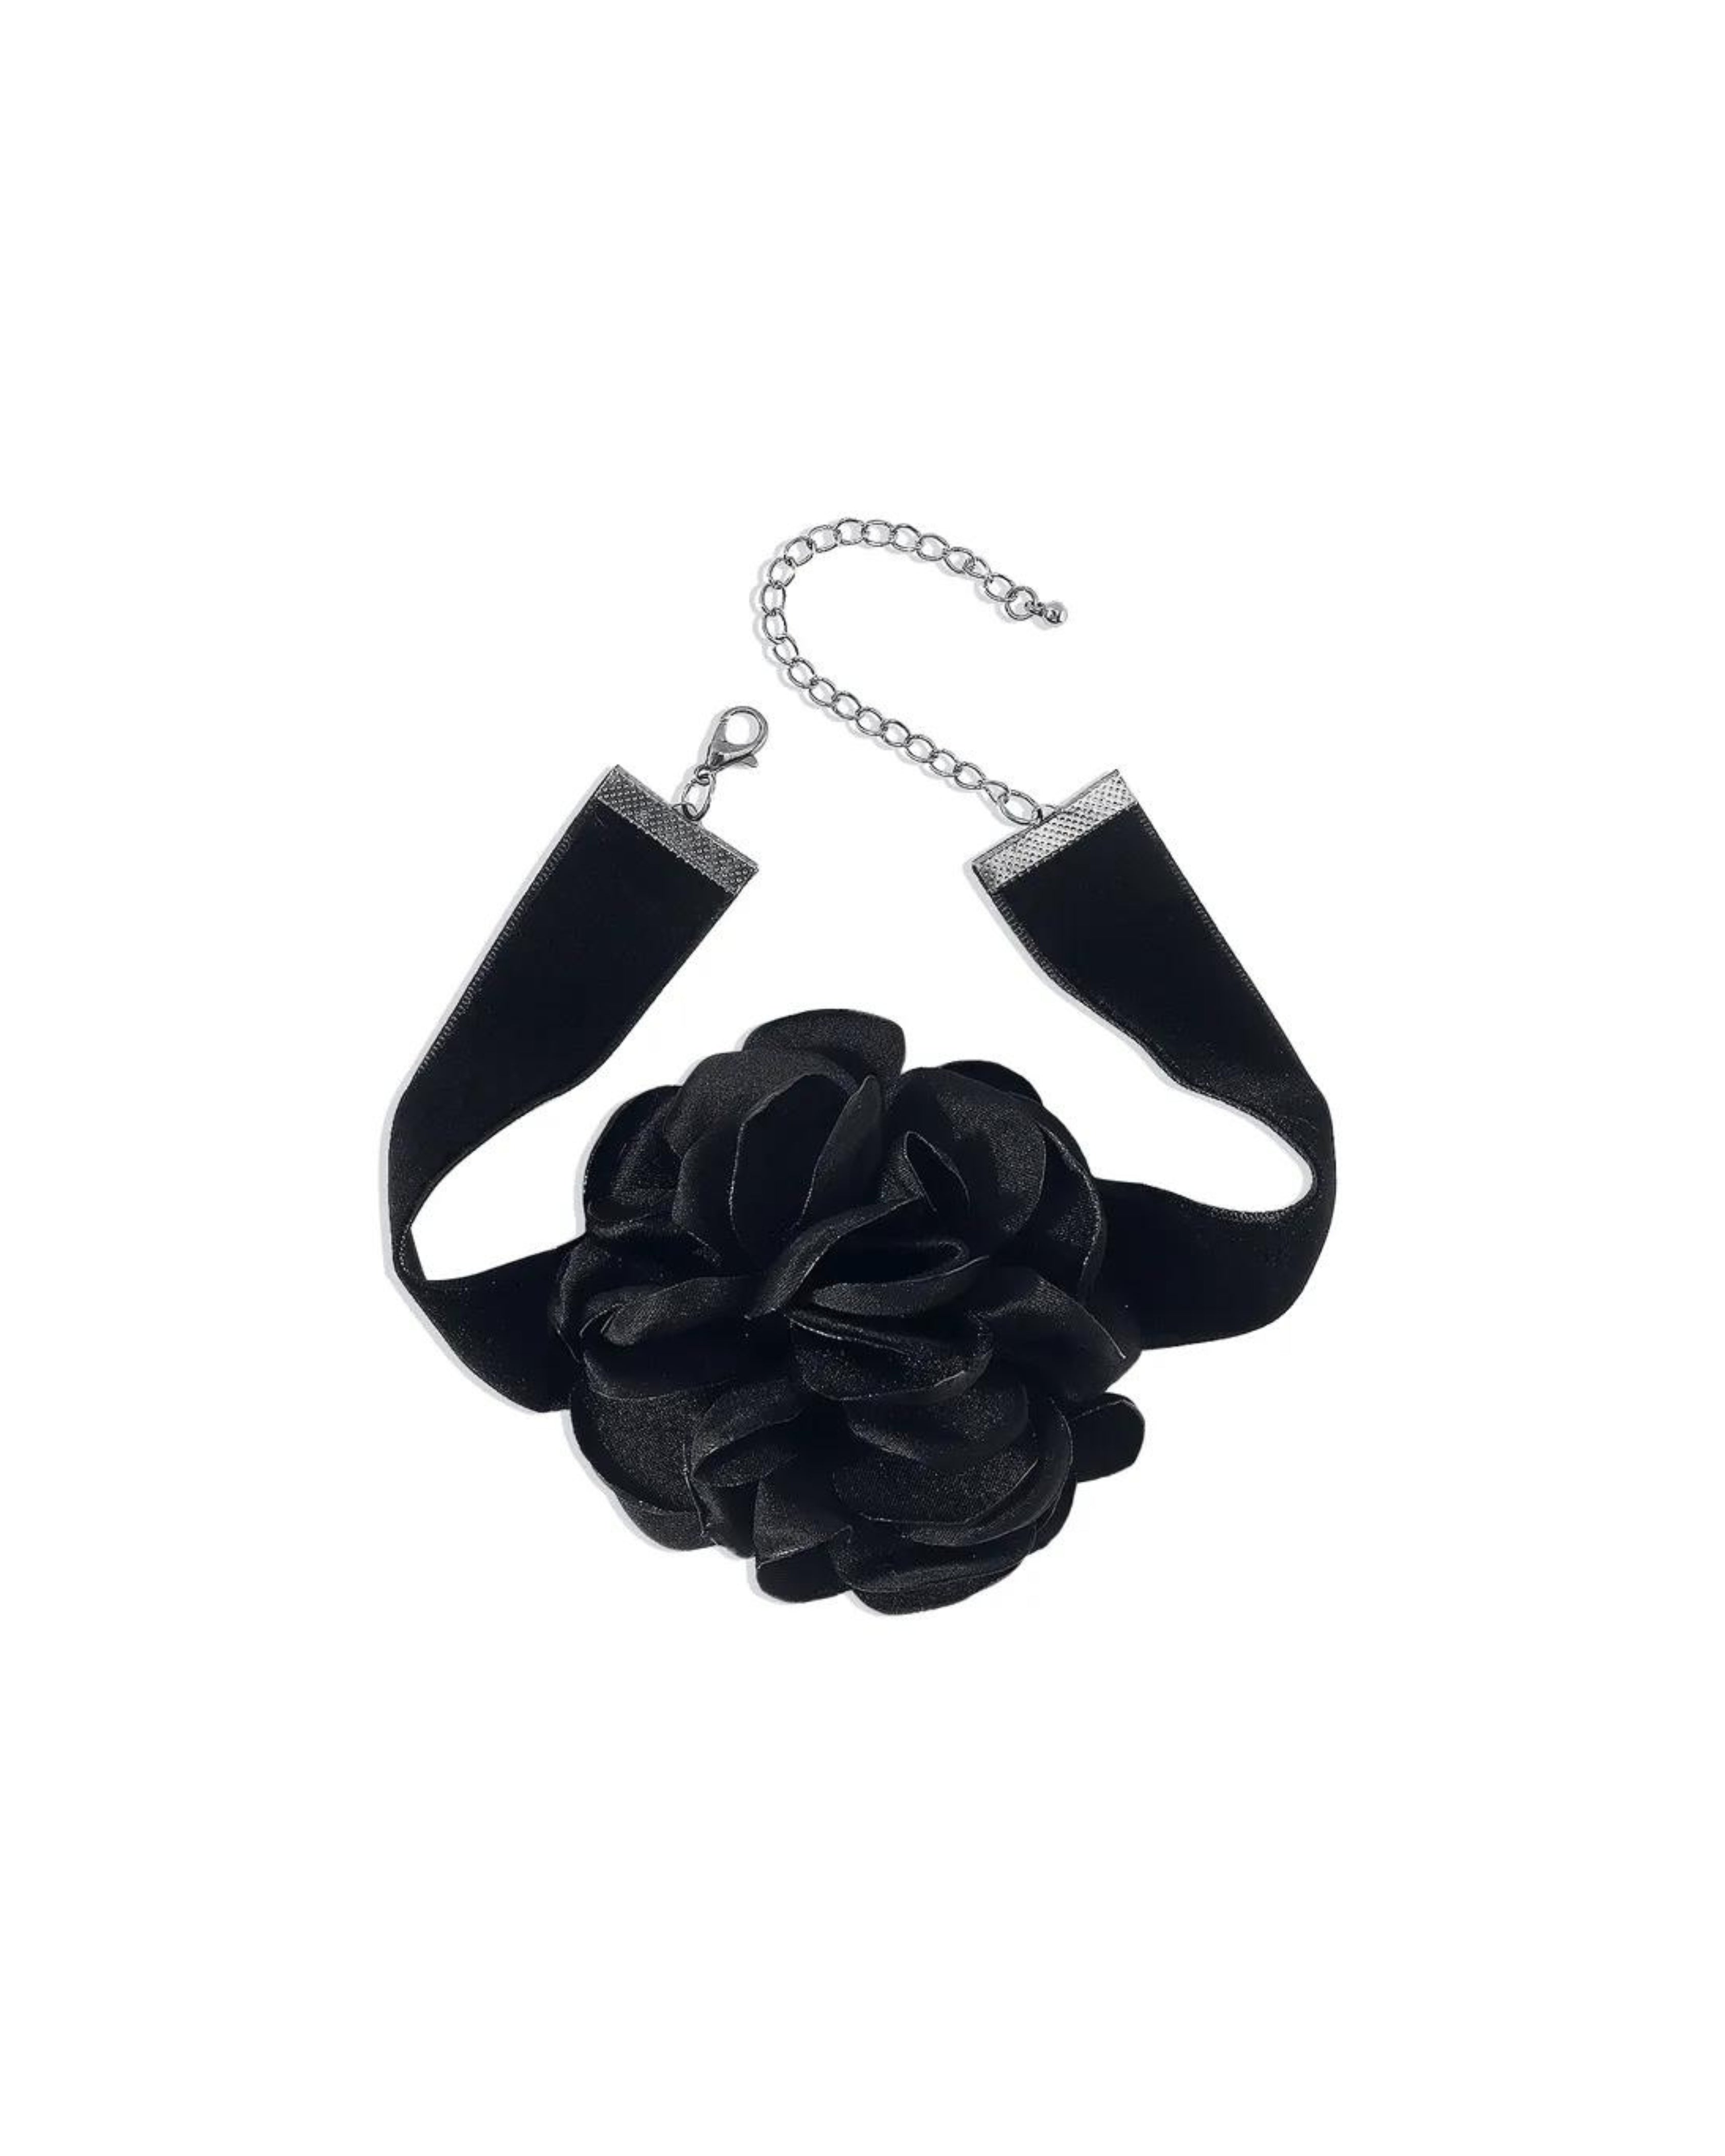 THE HARRY INSPIRED CORSAGE FLOWER CHOKER - EXCLUSIVE Jewellery from HEYIAMINHATELOVE - Just $10.00! SHOP NOW AT IAMINHATELOVE BOTH IN STORE FOR CYPRUS AND ONLINE WORLDWIDE